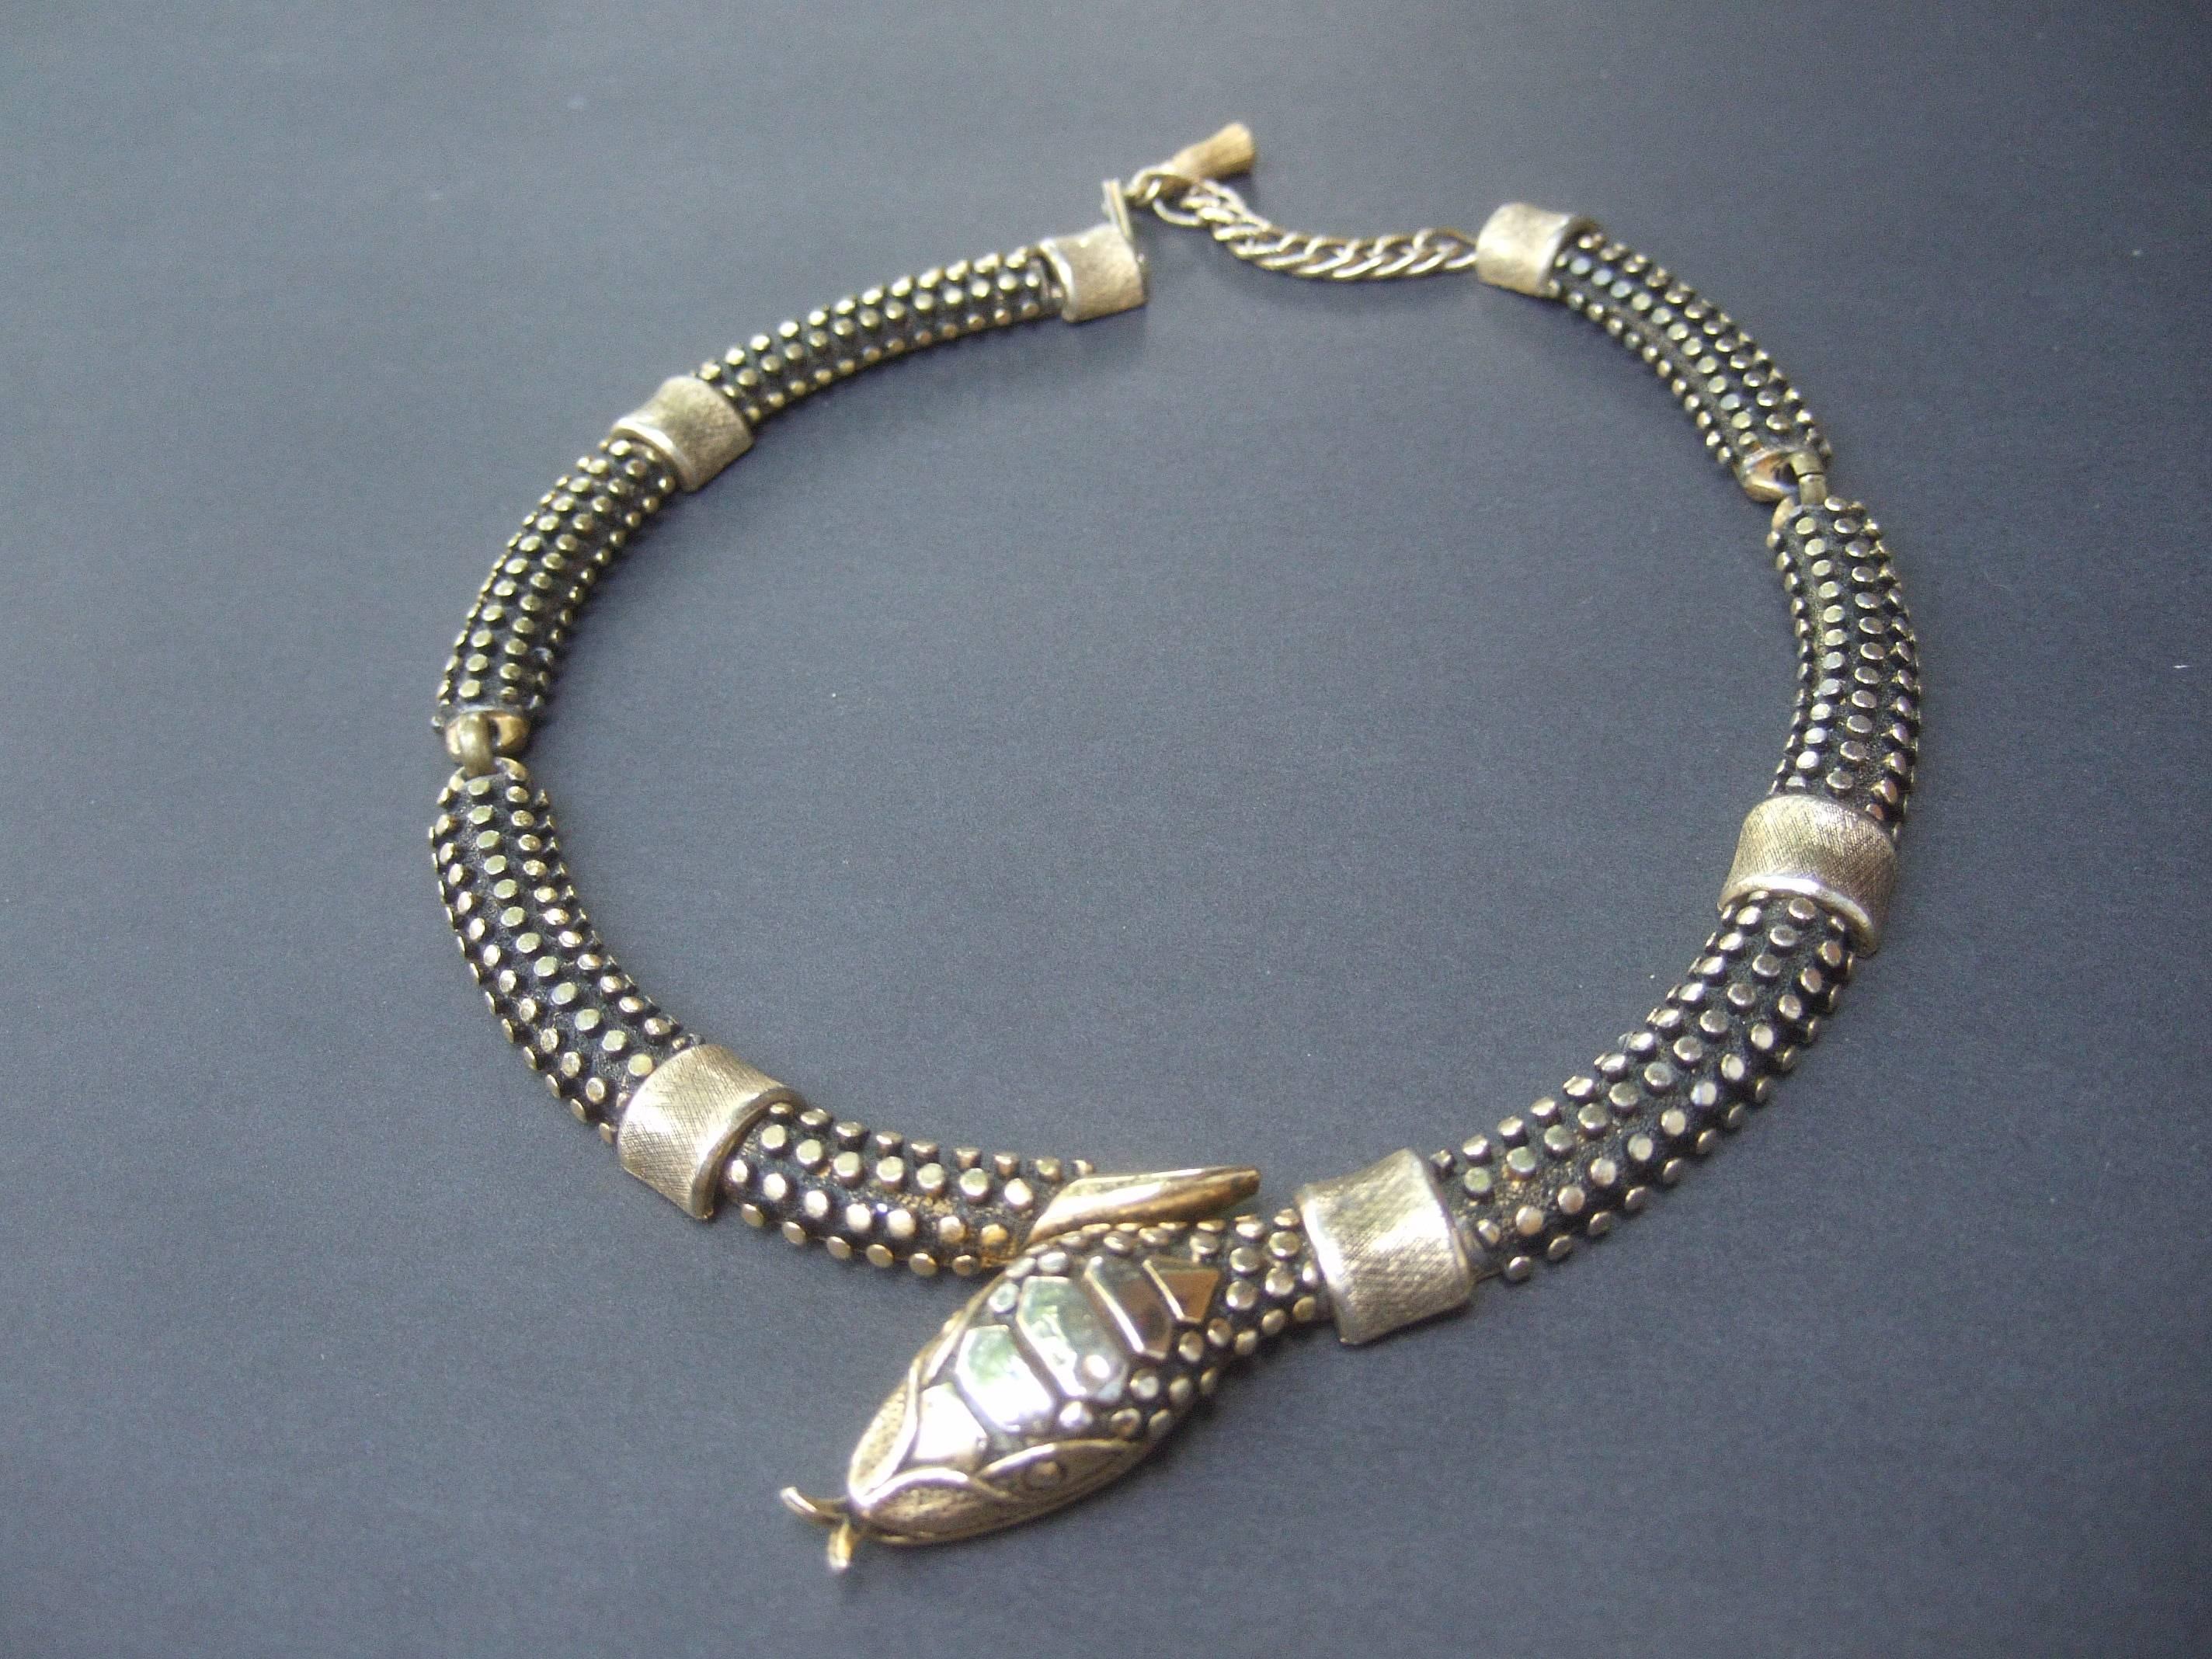                ***RESERVED SALE PENDING FOR CHARLES***

               ***RESERVED SALE PENDING FOR CHARLES***
Avant-garde gilt metal articulated serpent choker necklace c 1970s 
The unique choker necklace is designed with a series of